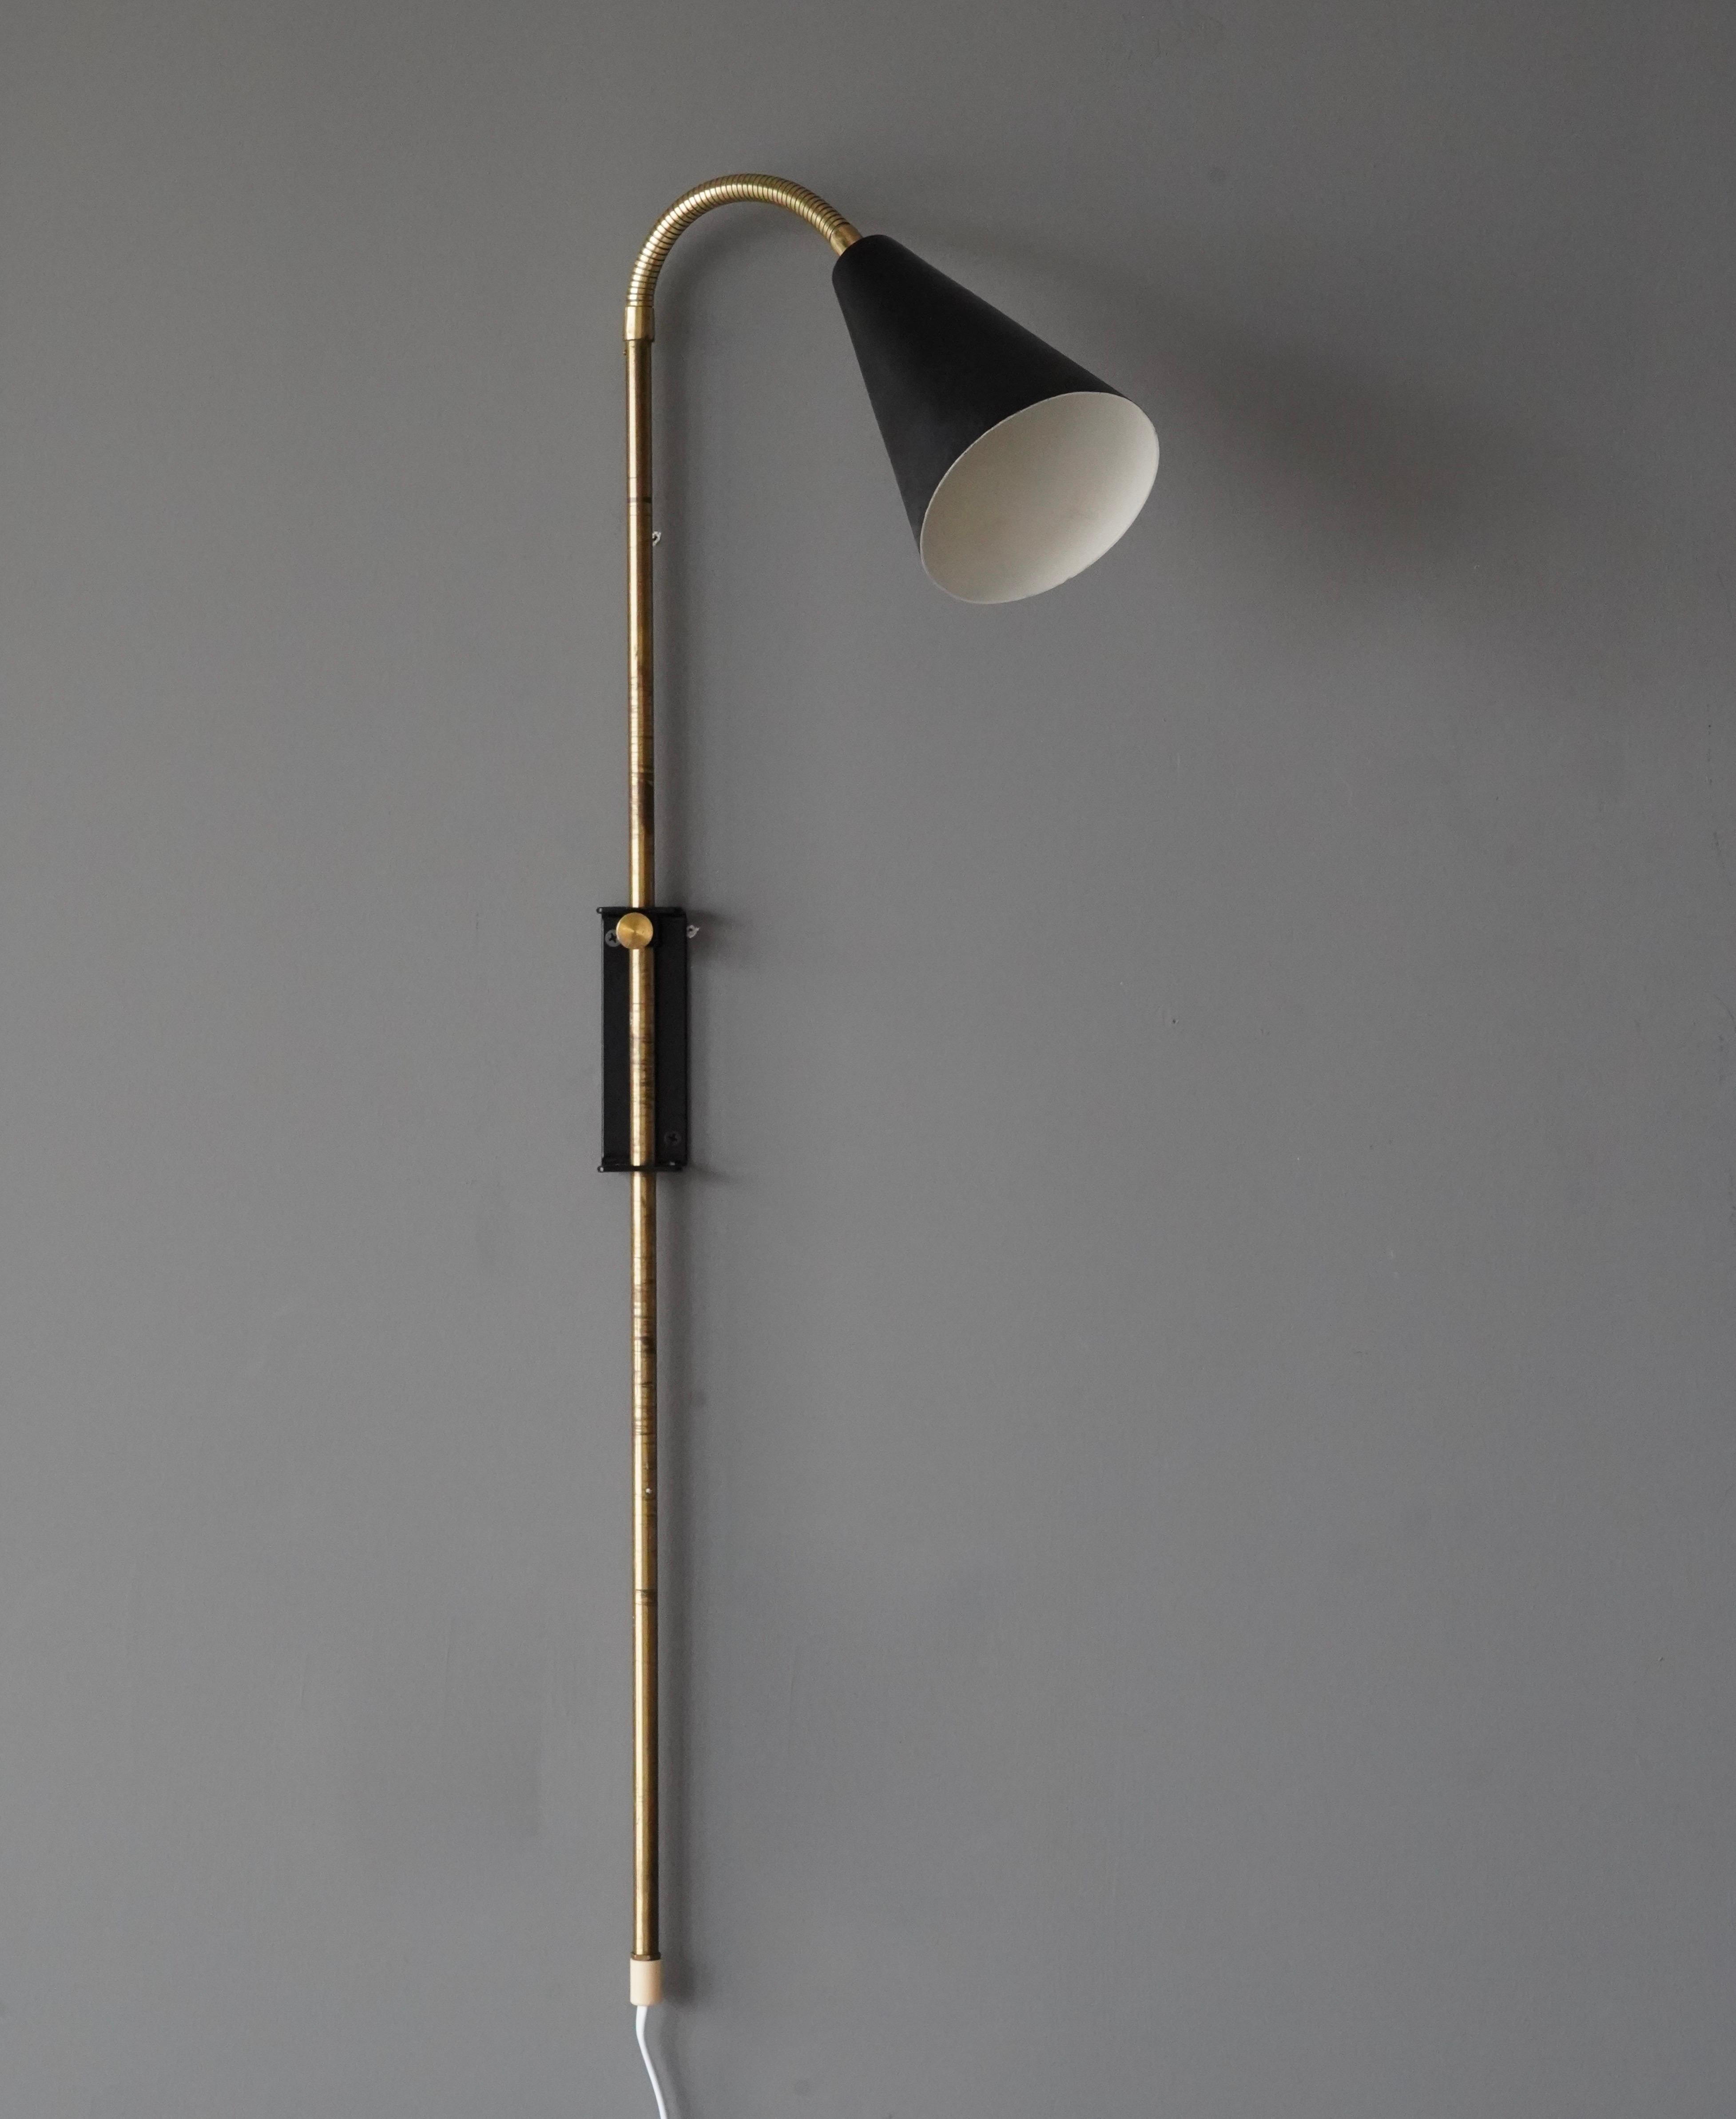 An adjustable functionalist wall light / task light. Designed and produced in Sweden, 1940s-1950s.

Features brass and black-lacquered metal.

Dimensions listed are as its illustrated position.